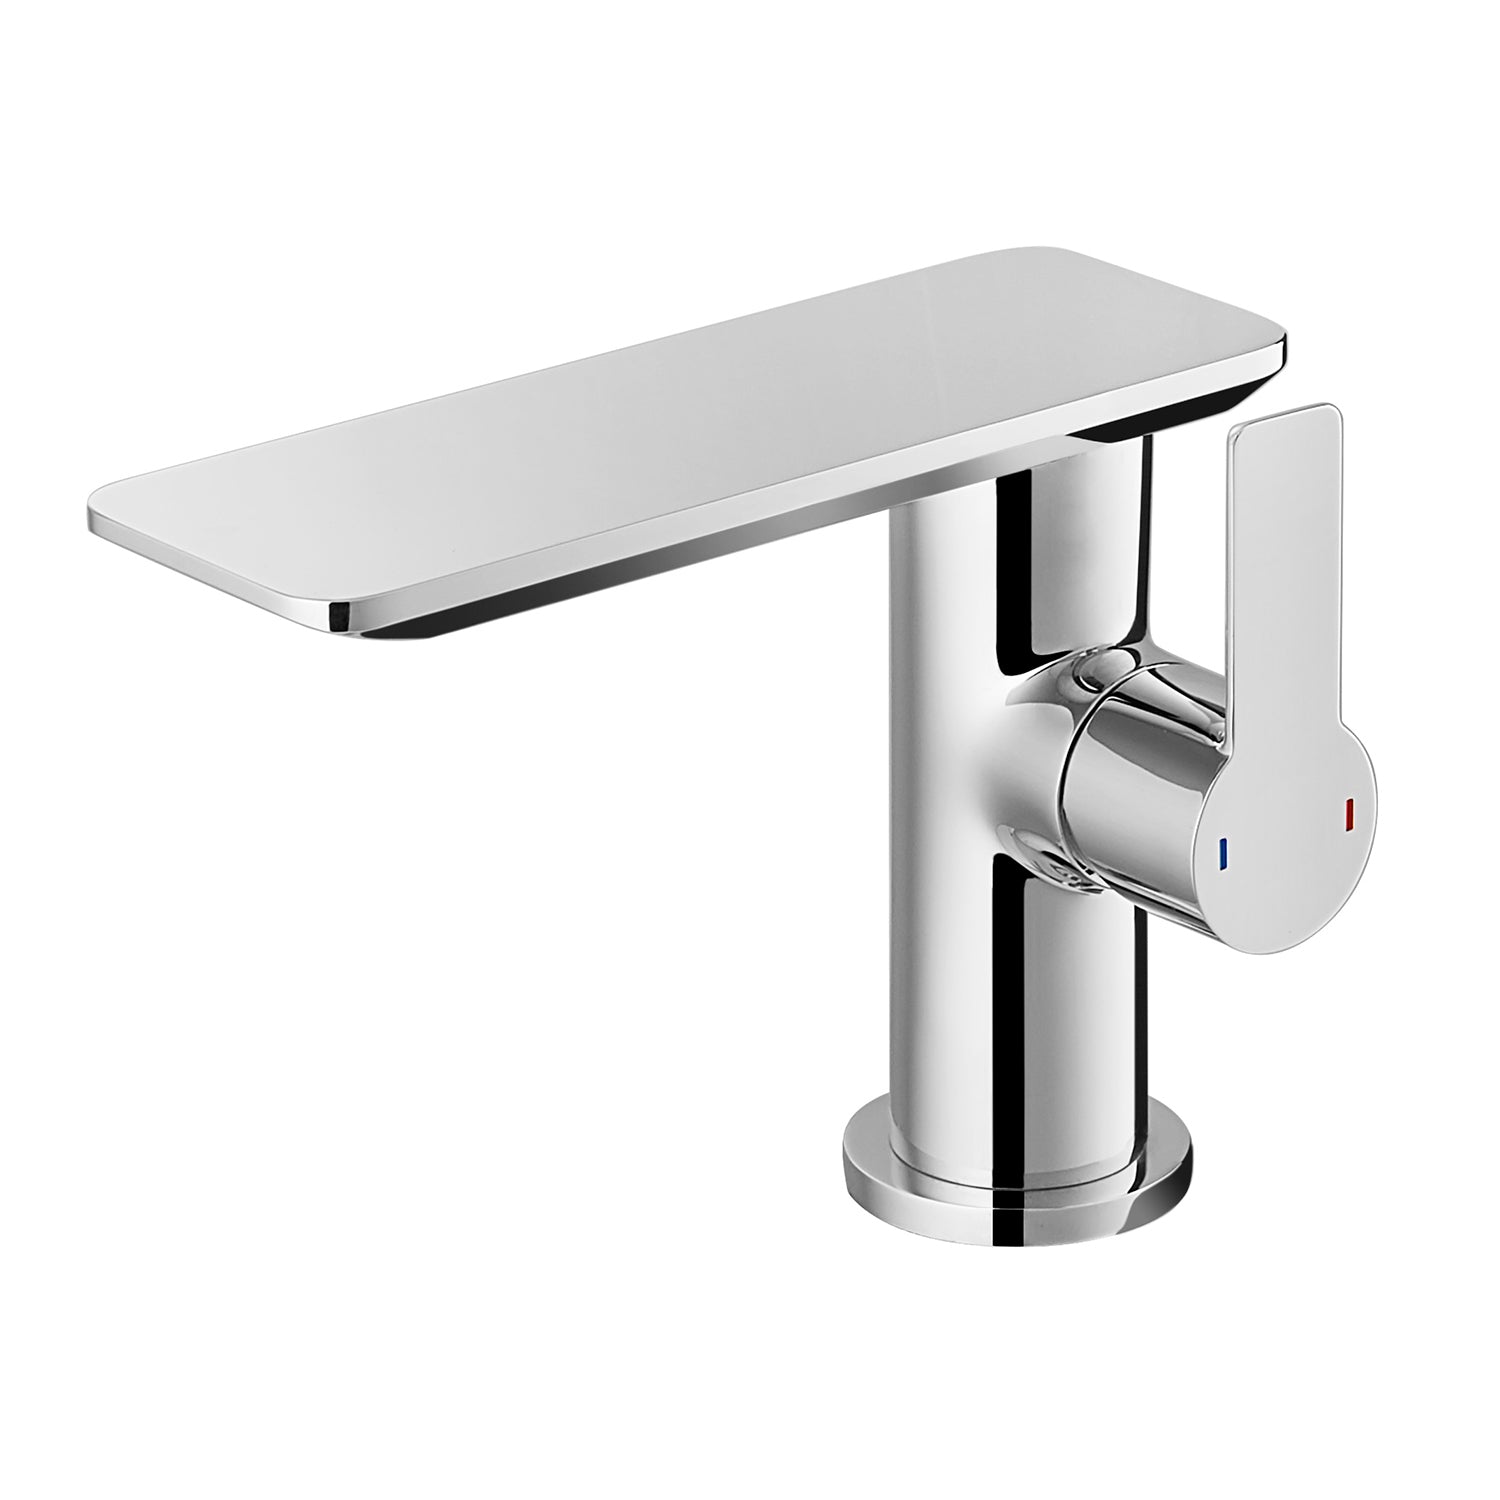 DAX Single Handle Bathroom Waterfall Faucet, Deck Mount, Brass Body, Spout Height 4-15/16 Inches (DAX-8205)